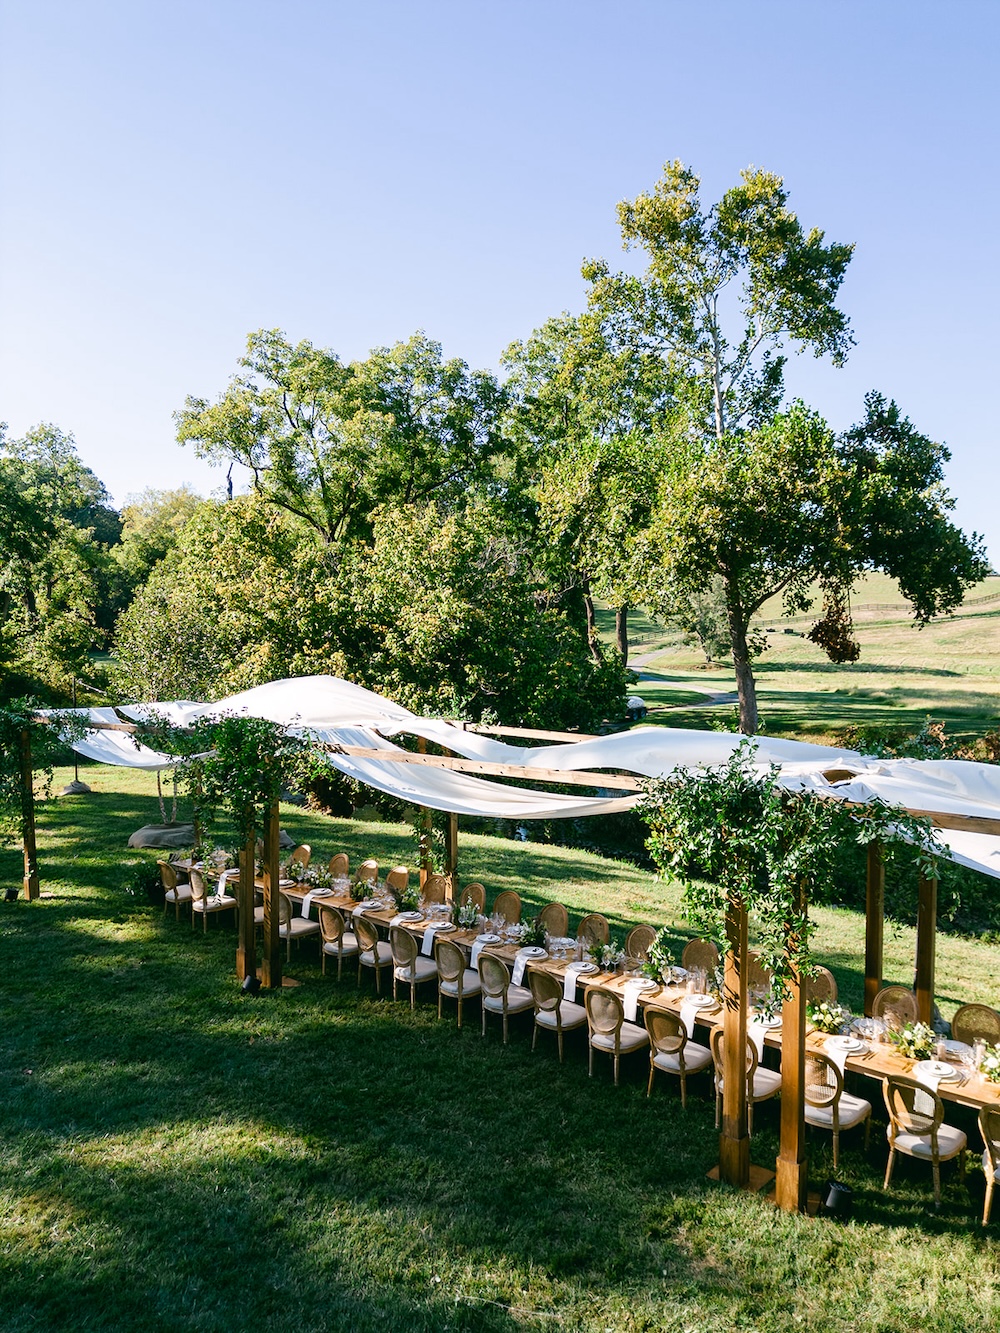 Alfresco dinner with farmhouse tables, tented dinner. Elevated boho chic table design. Milestone birthday party celebration weekend in Middleburg, Virginia. Sarah Bradshaw Photography.